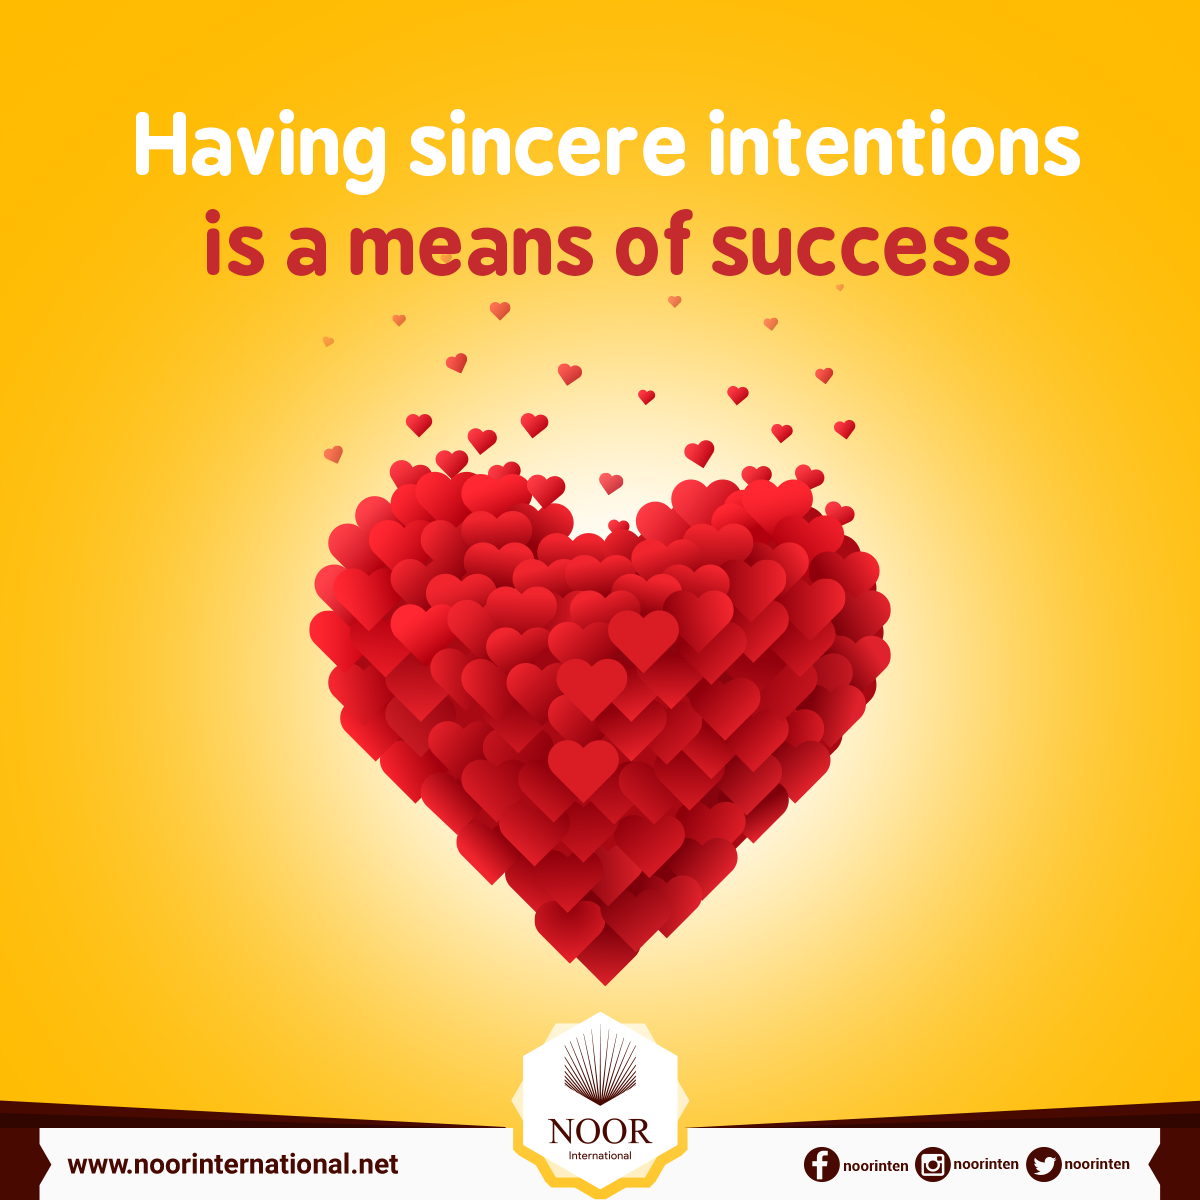 Having sincere intentions is a means of success